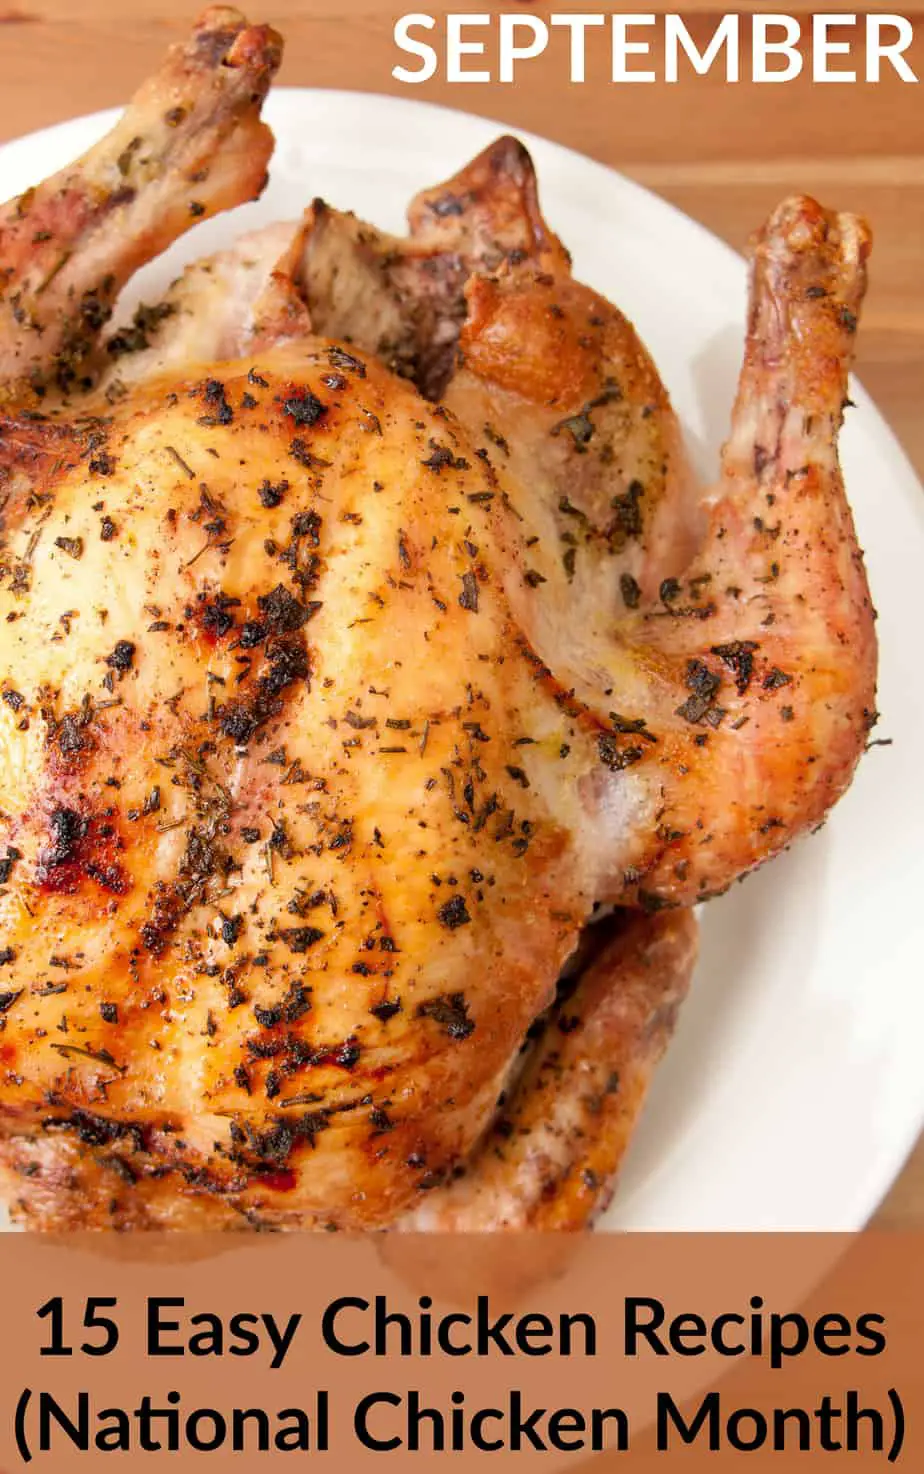 15 Easy Chicken Recipes to Make for National Chicken Month